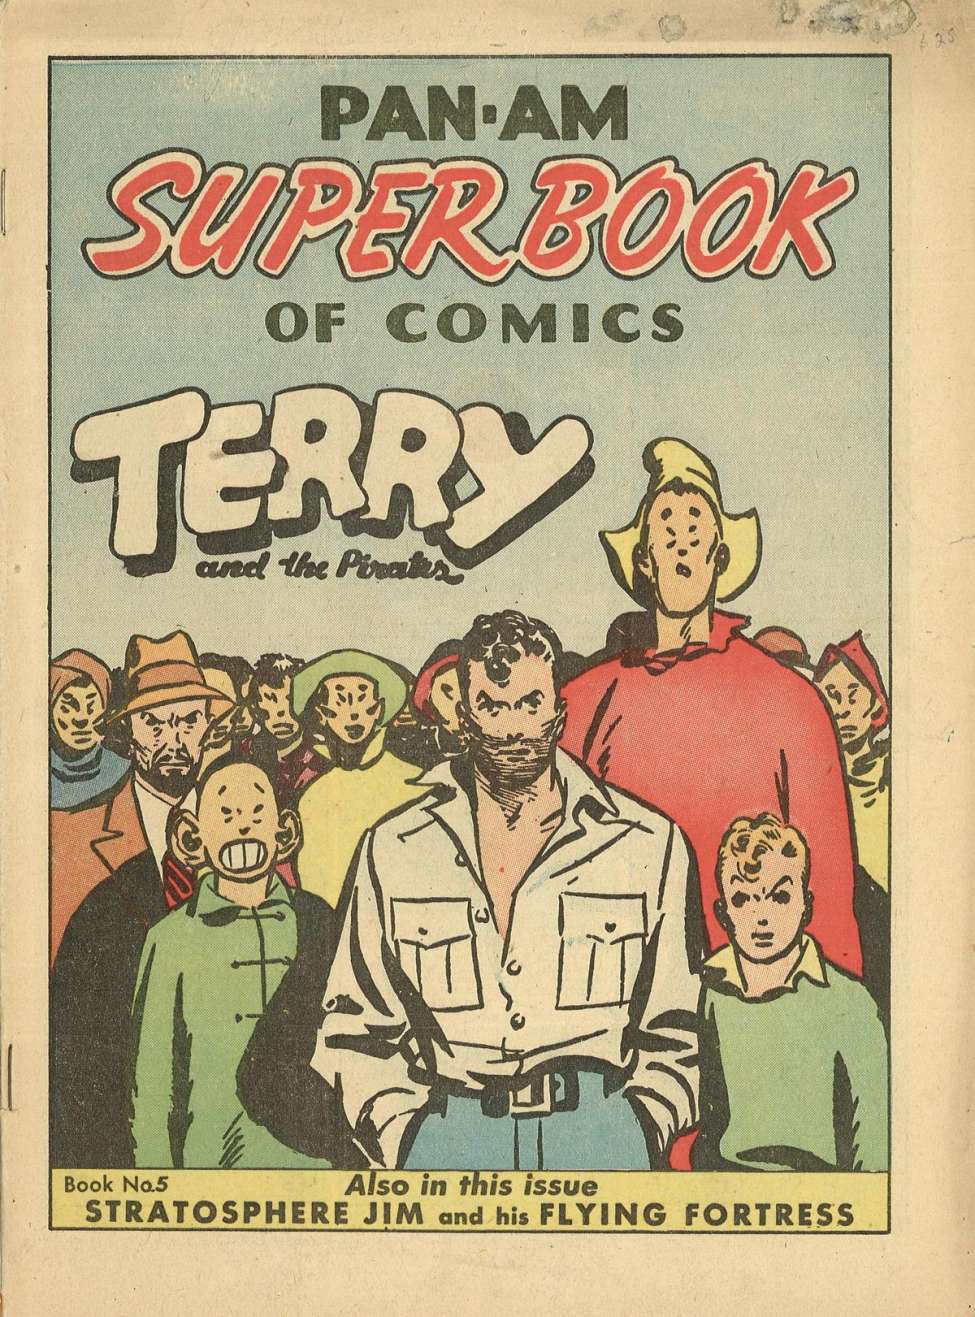 Comic Book Cover For Terry And The Pirates (Super Book Of Comics) 5